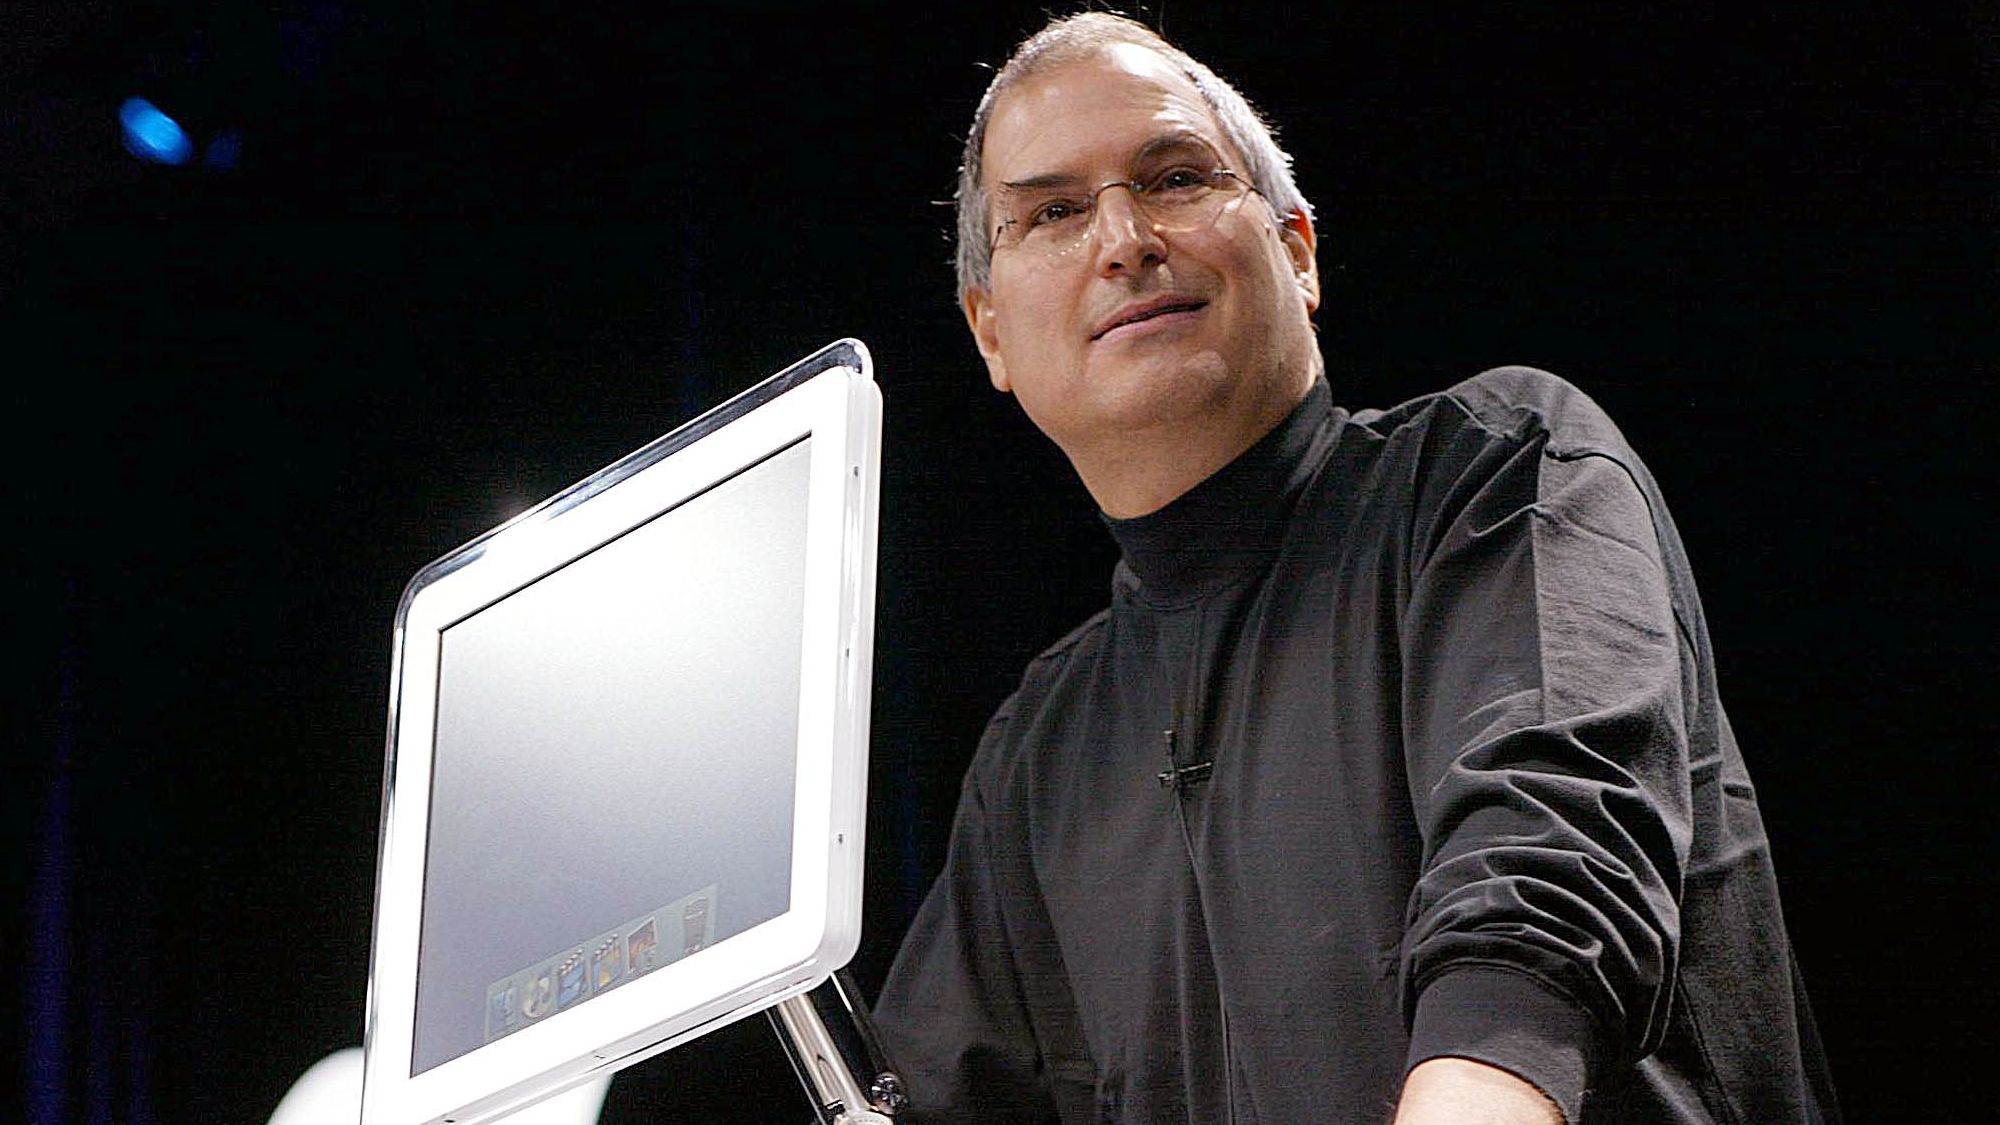 Apple Computer co-founder and CEO Steve Jobs introduces the all-new flat-panel iMac computer during his keynote speech at the MacWorld Expo in January 2002. 